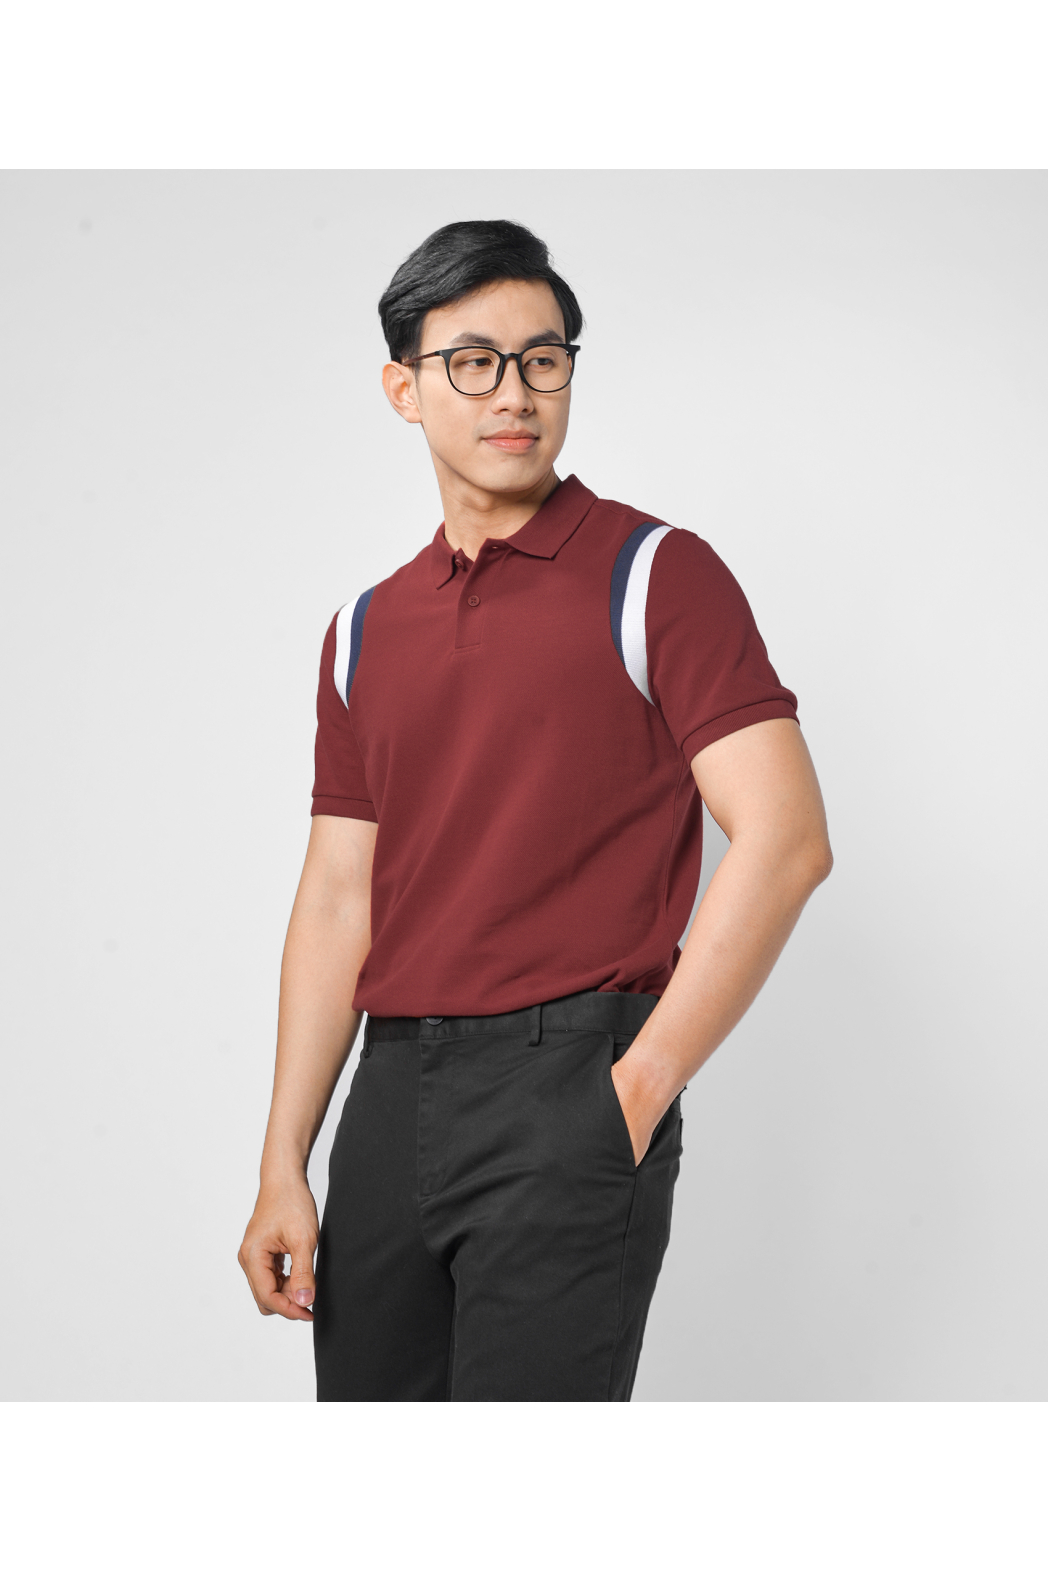 Áo polo contrast with Rib FITTED form – 10F20POL003